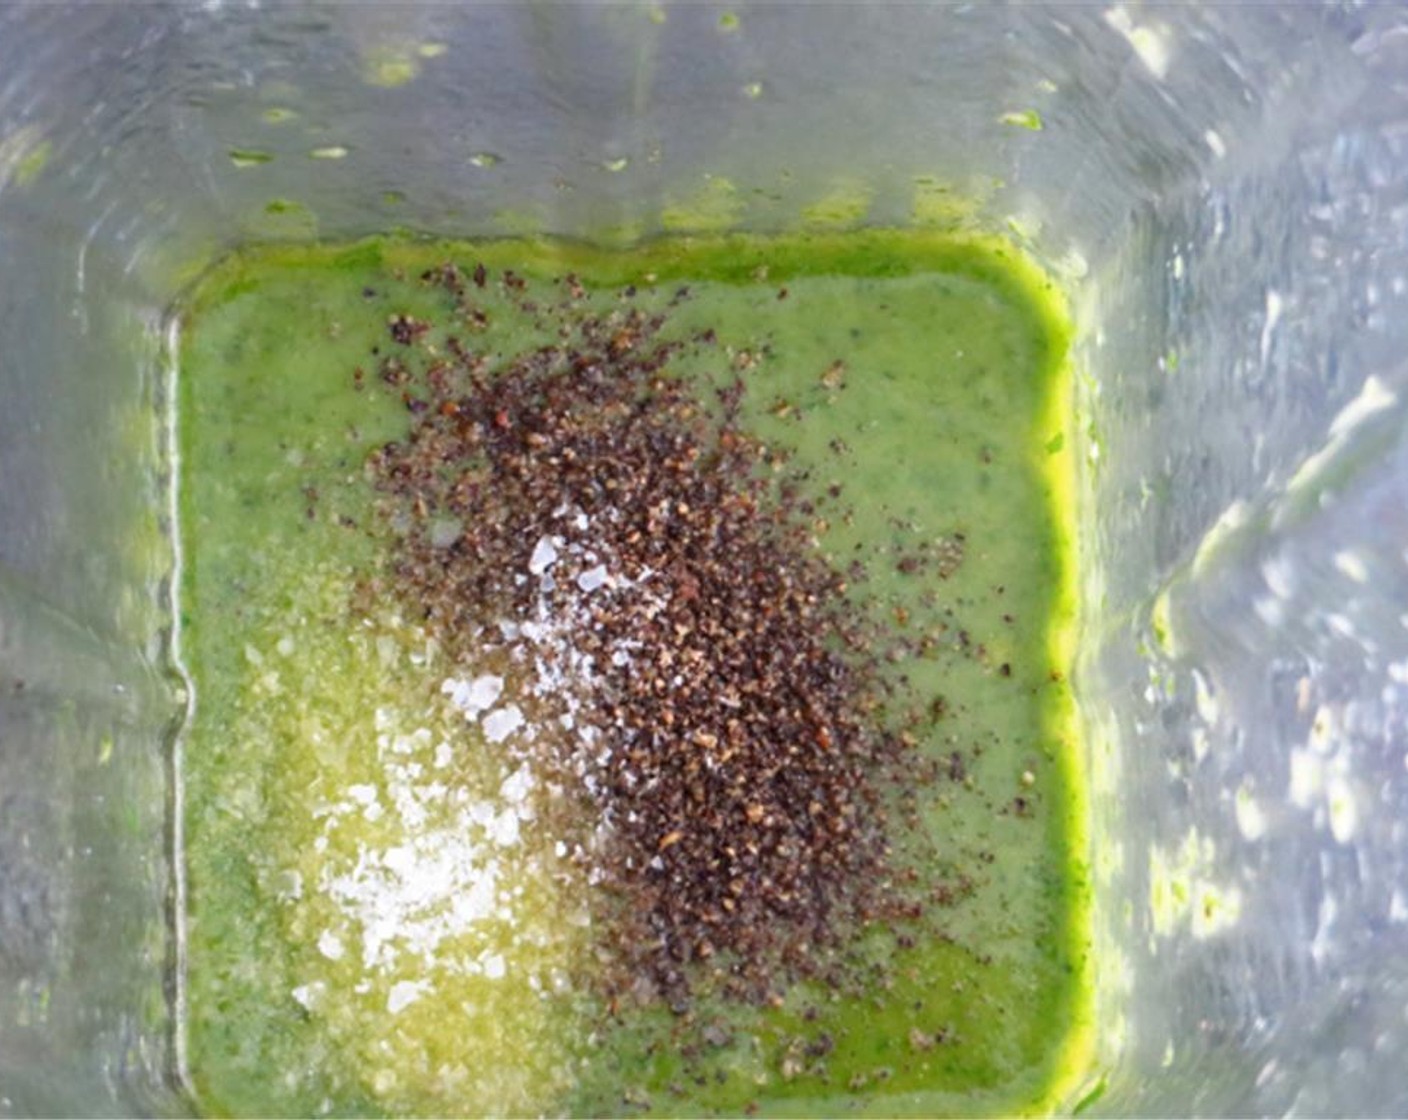 step 3 In a blender, combine the Fresh Cilantro (1 1/2 cups), garlic, Lime (1), Red Wine Vinegar (2 Tbsp), Olive Oil (1/2 cup), Kosher Salt (1/2 tsp), and Ground Black Pepper (1/2 tsp). Puree until smooth. Taste and season as desired.